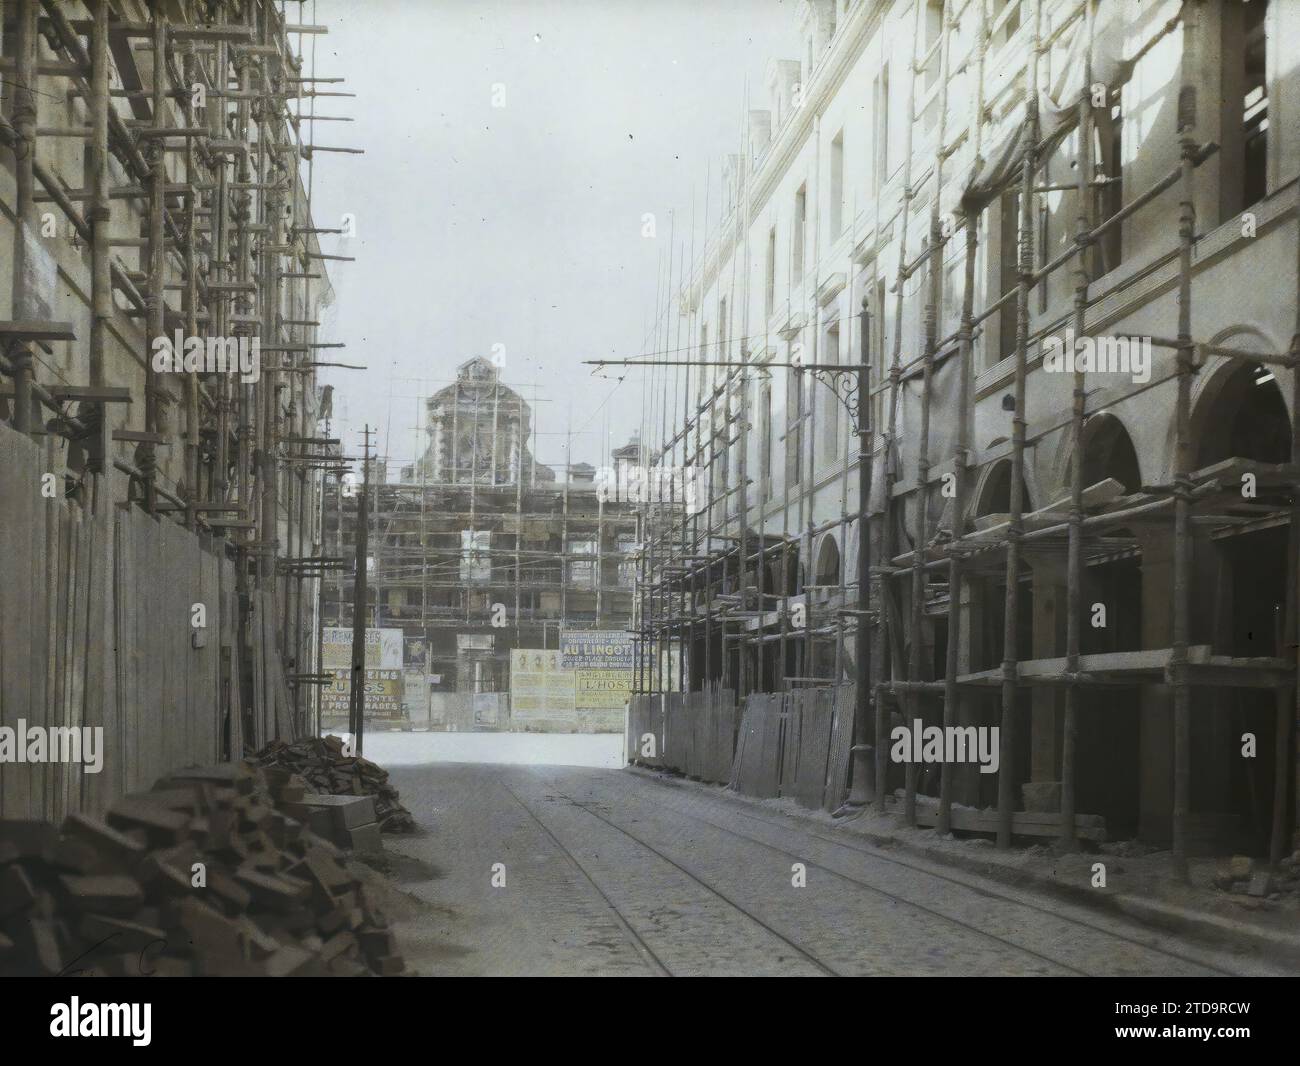 Reims, France, Housing, Architecture, First World War, Scaffolding, shoring, Works, Town Hall, town hall, Public civil architecture, Street, District, Reconstructions, Post-war, France, Reims, Rue Colbert and the Hôtel- de-City, Reims, 06/04/1924 - 06/04/1924, Léon, Auguste, photographer, 1924 (?) - Reims - Auguste Léon, Autochrome, photo, Glass, Autochrome, photo, Positive Stock Photo